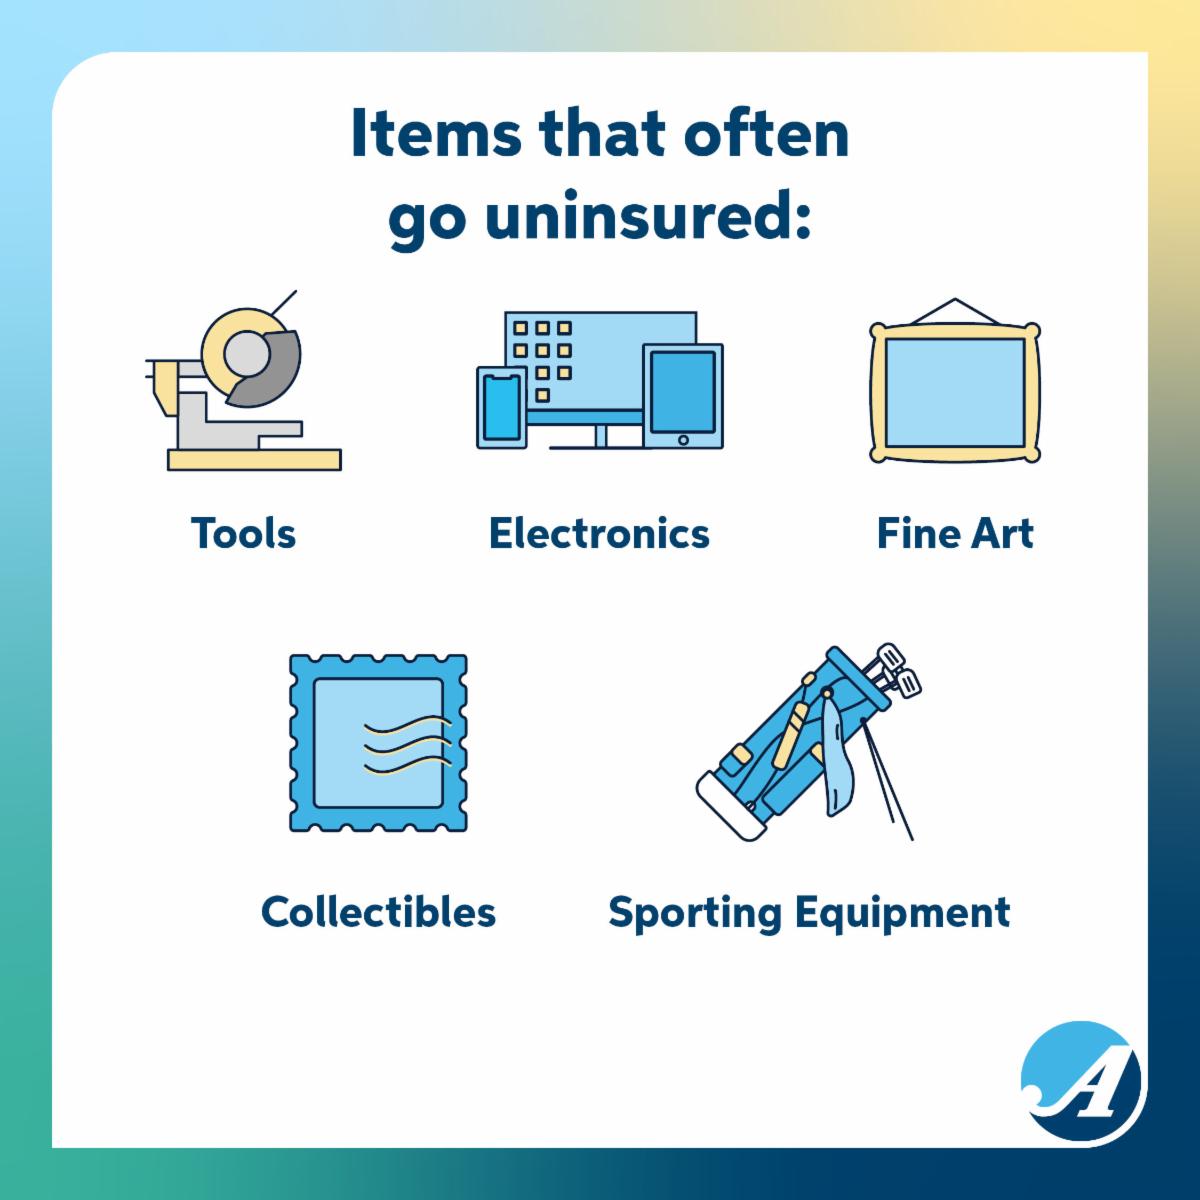 We can’t protect your things if we don’t know you have them, so let us know if you have added any new items that need coverage.

#homeinsurance
#personalinsurance
#independentagent
#insurancegreenville
#insurancesc